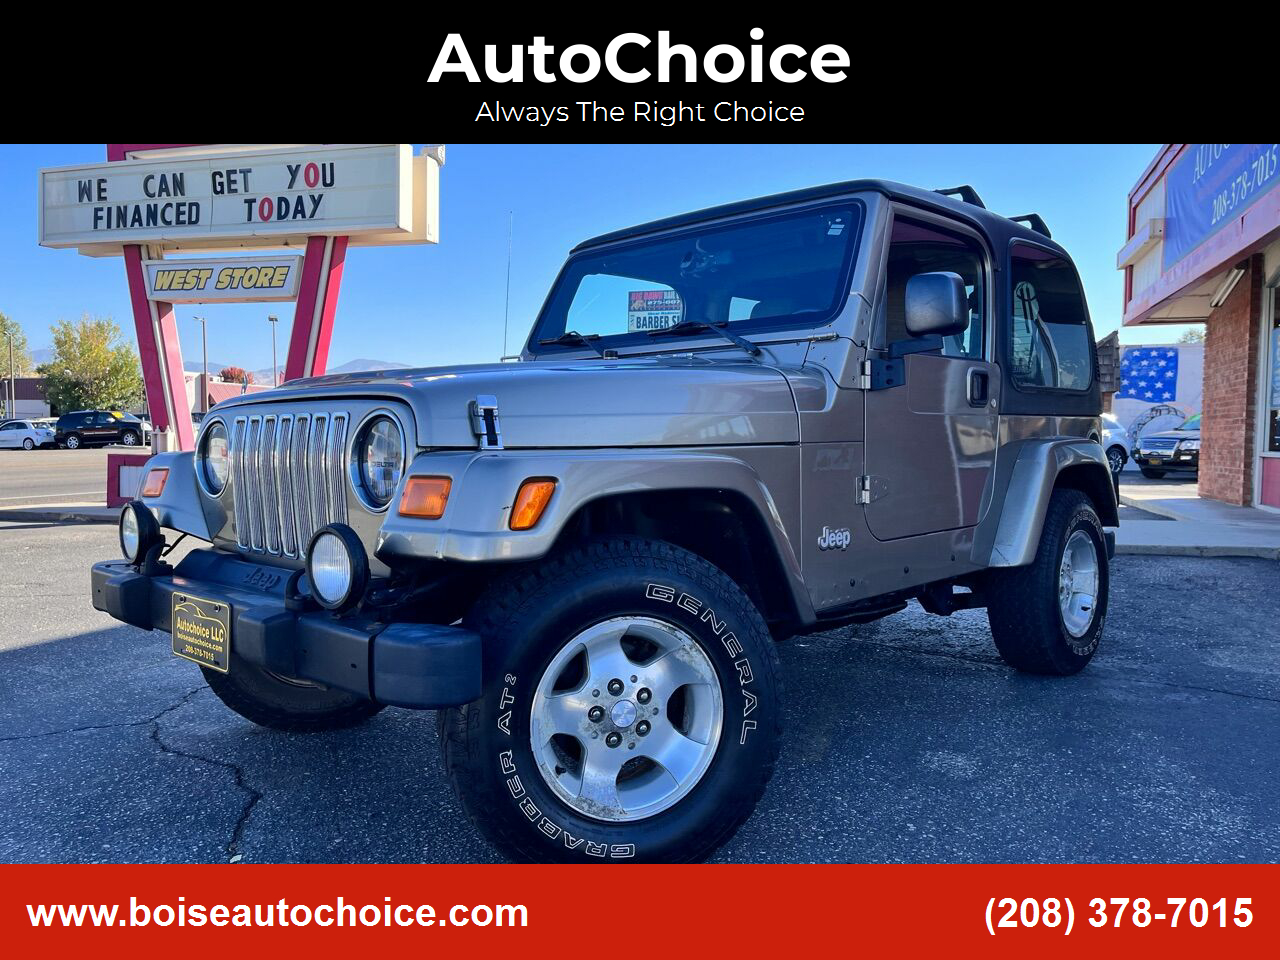 2003 Jeep Wrangler For Sale In Boise, ID ®